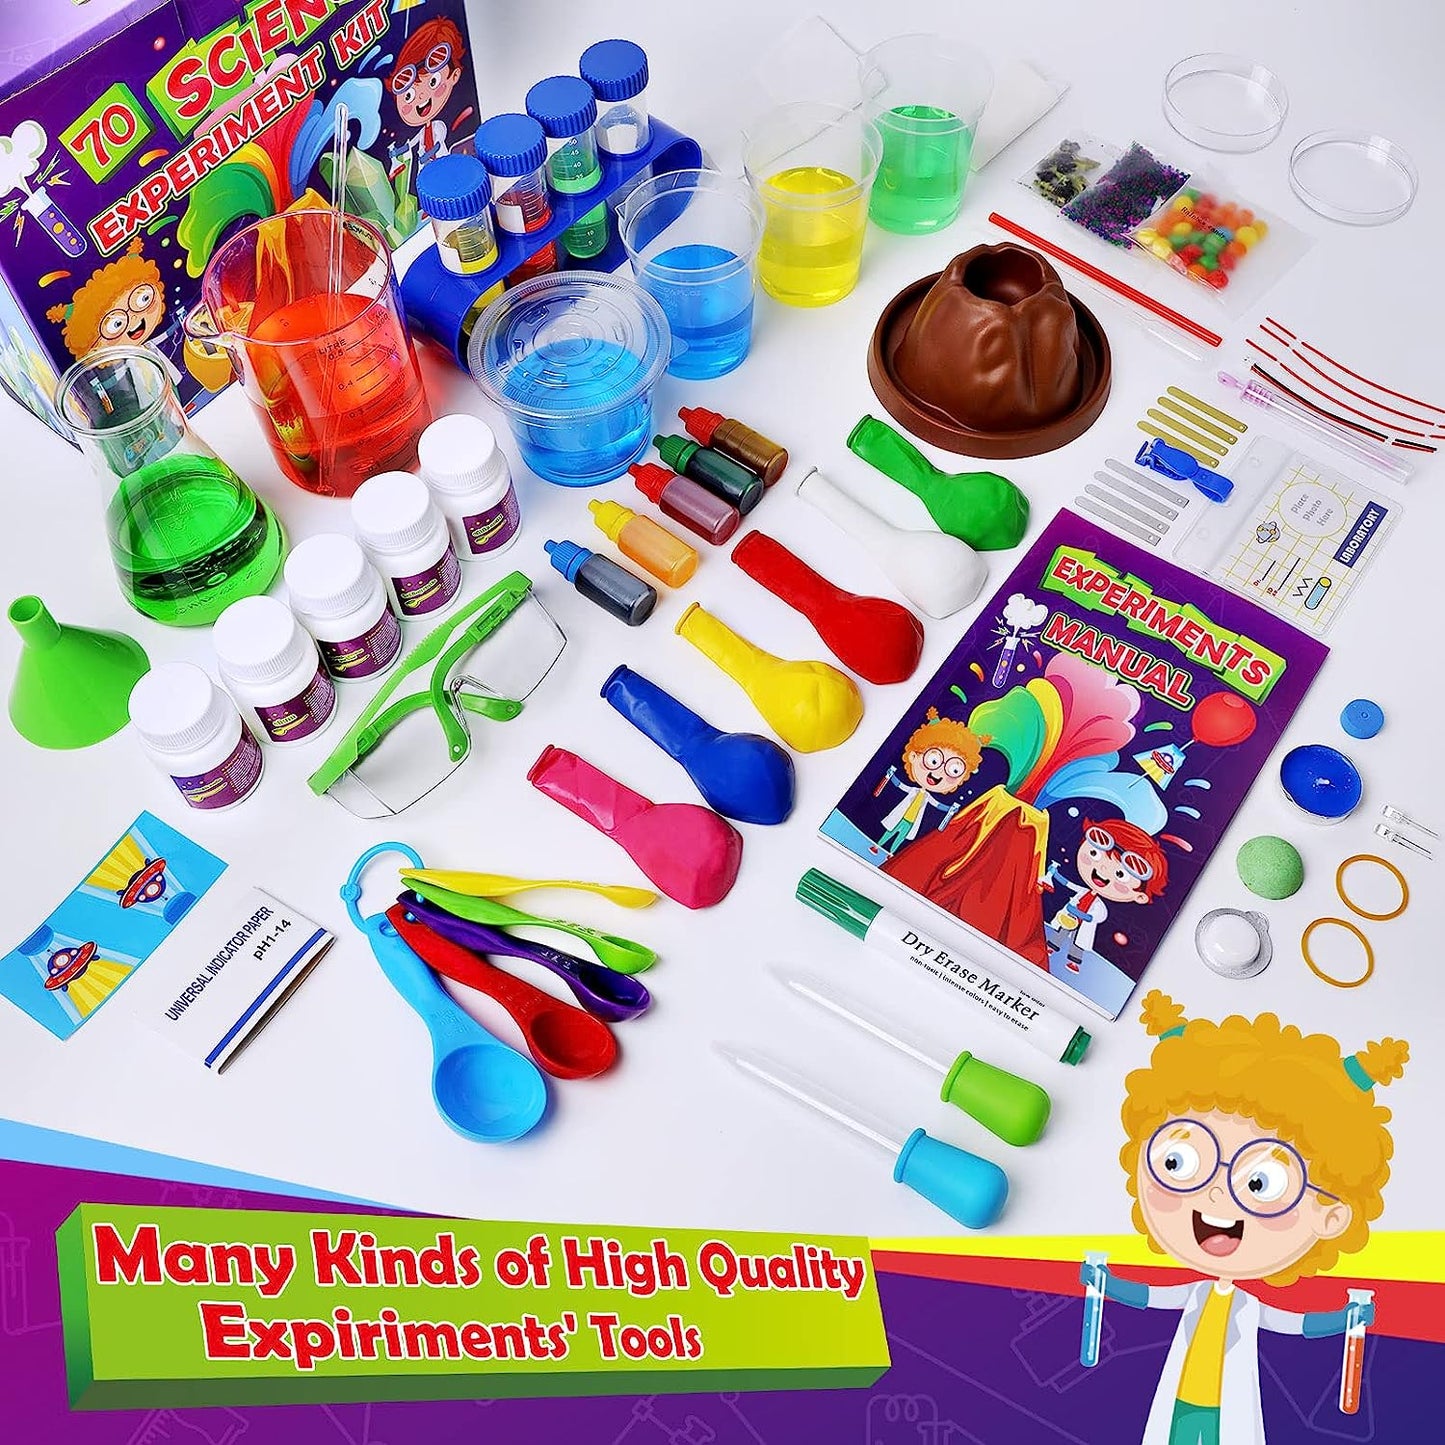 A kids lab science kit which includes 70 different experiments. All the items from inside the kit are laid out on a table. 